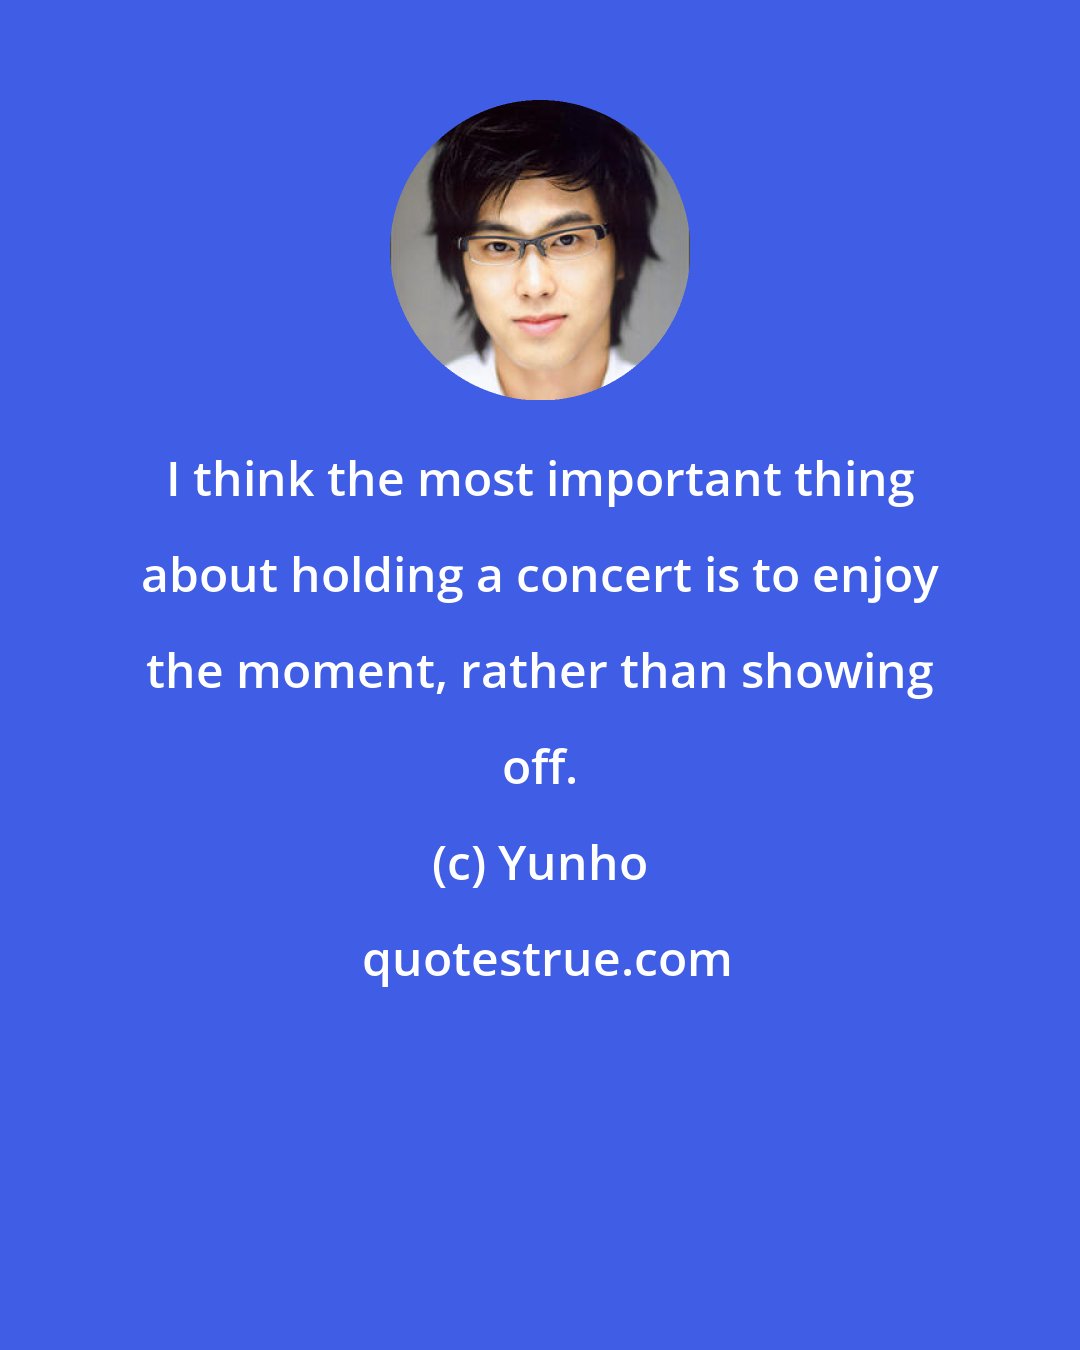 Yunho: I think the most important thing about holding a concert is to enjoy the moment, rather than showing off.